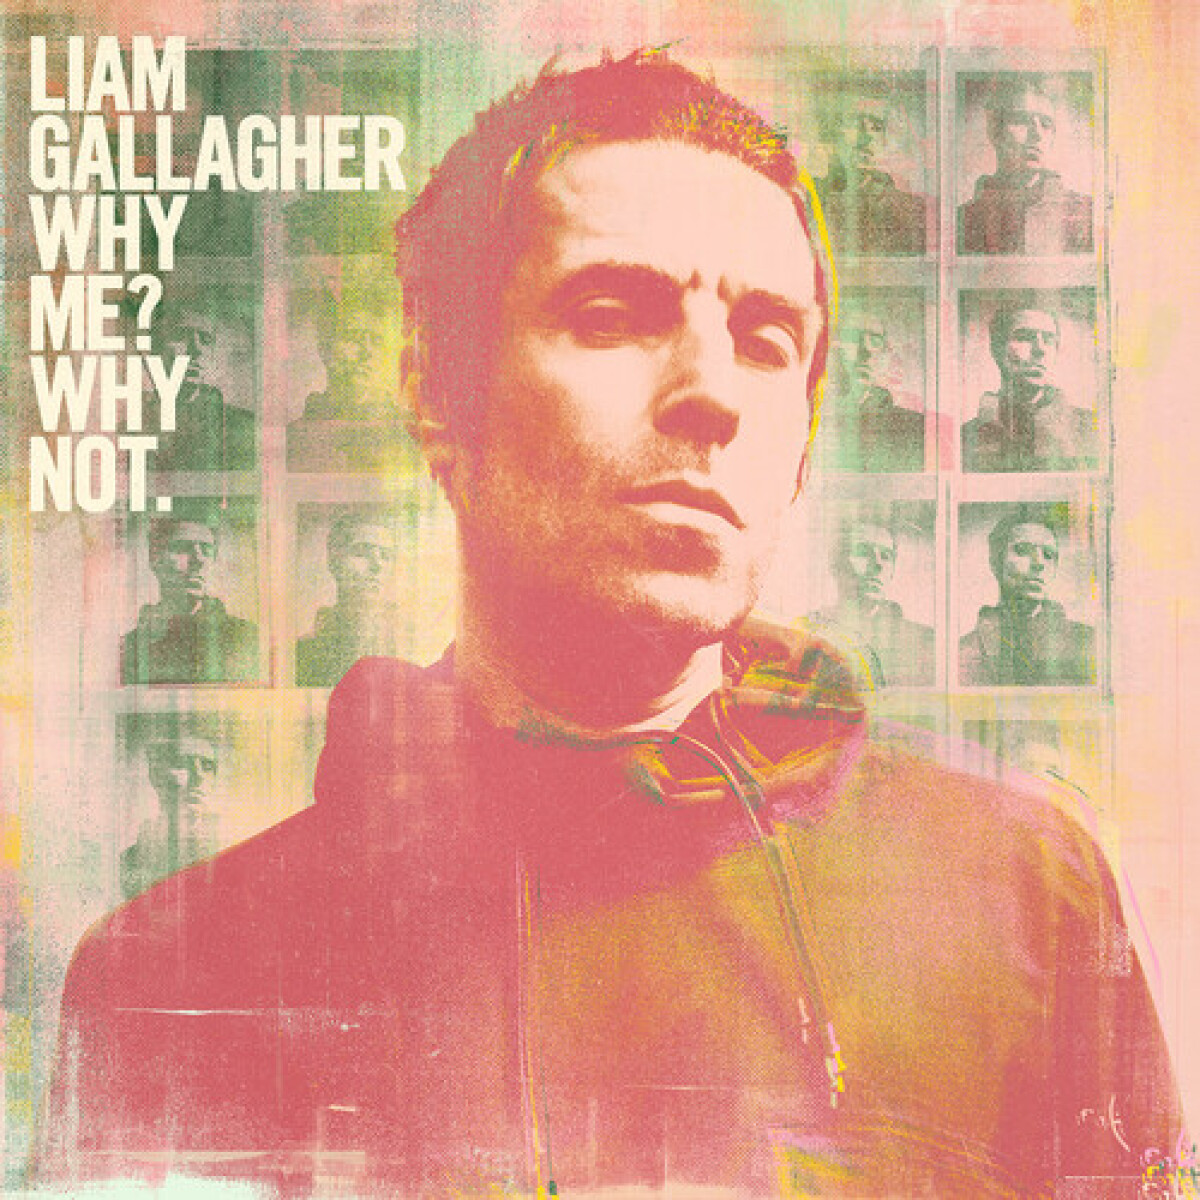 Gallagher Liam - Why Me Why Not - Vinilo 